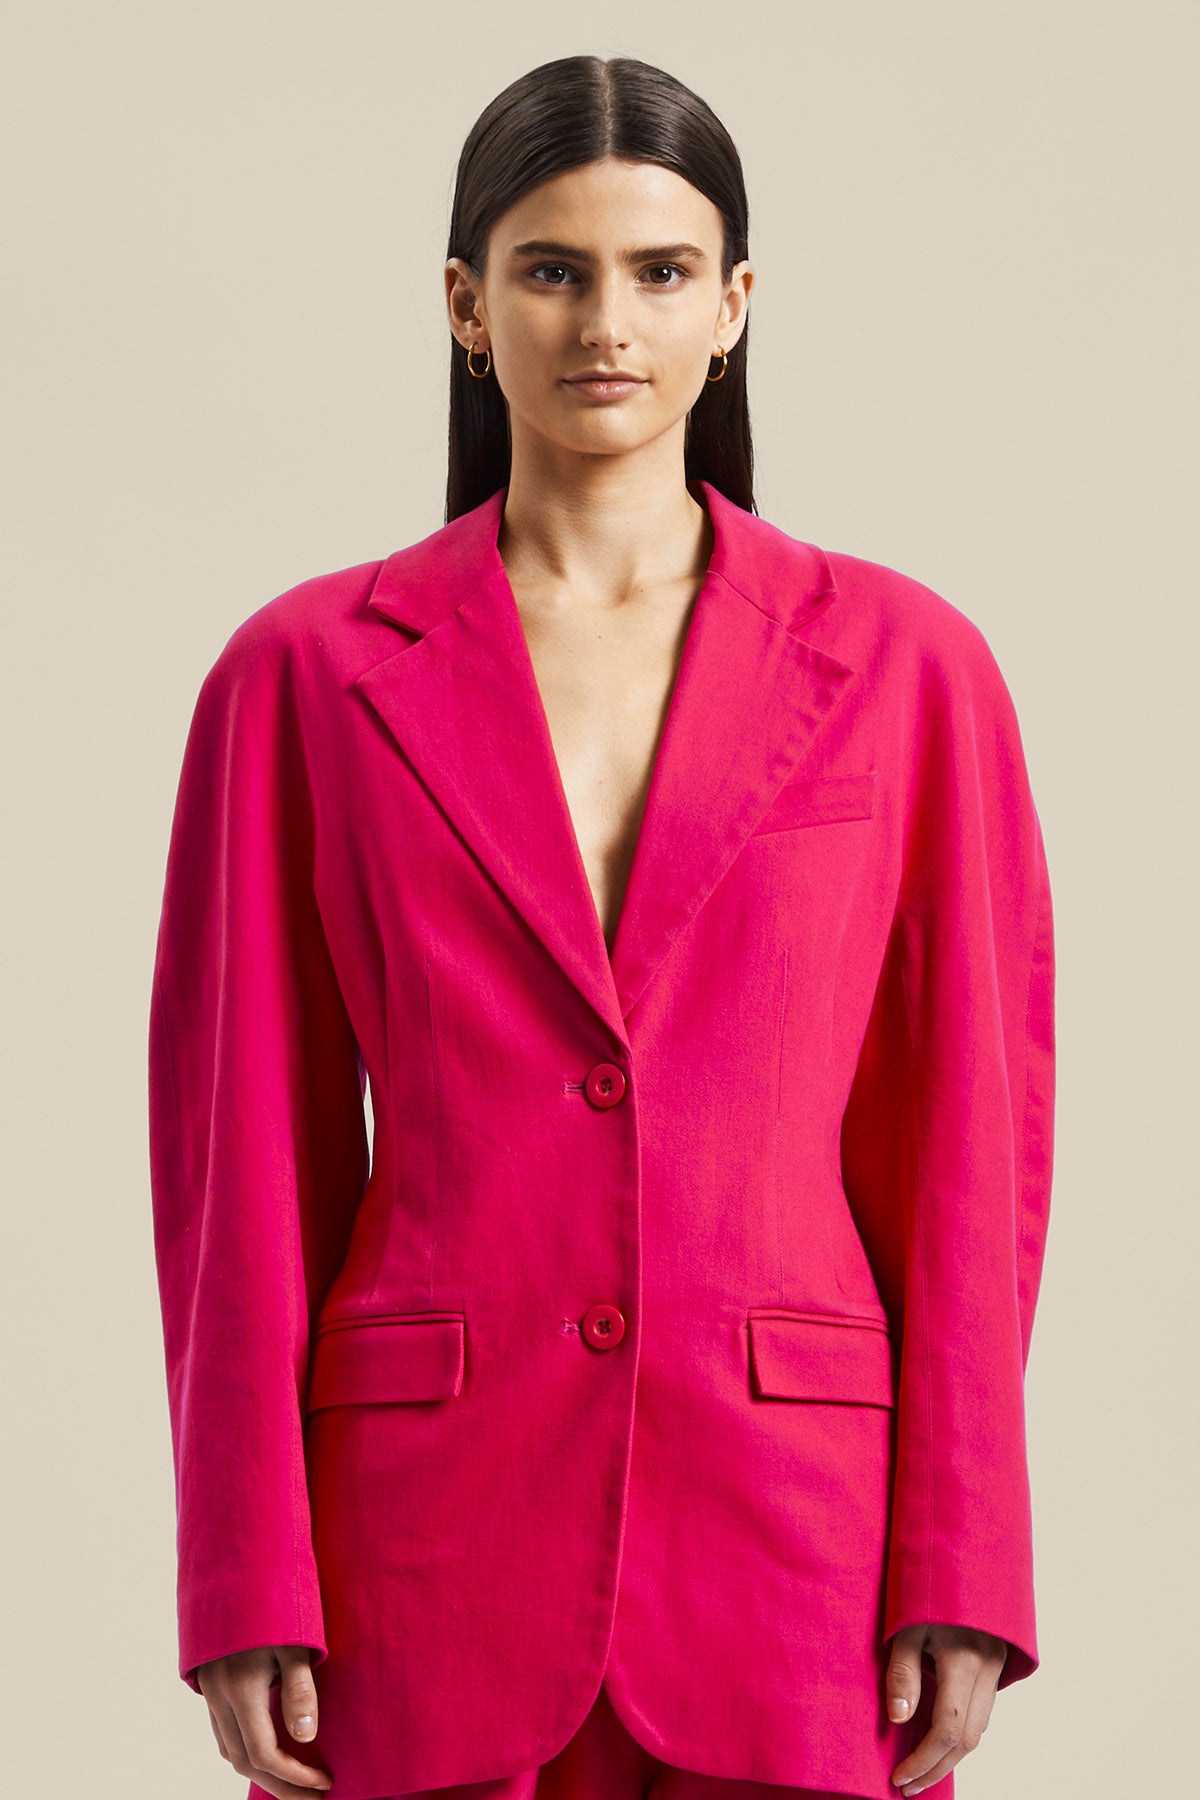 Model wearing the pink Novelist Jacket from Australian fashion designer GINGER & SMART featuring, tailored structural cut and oversized shape. Worn with the pink Novelist Pant.